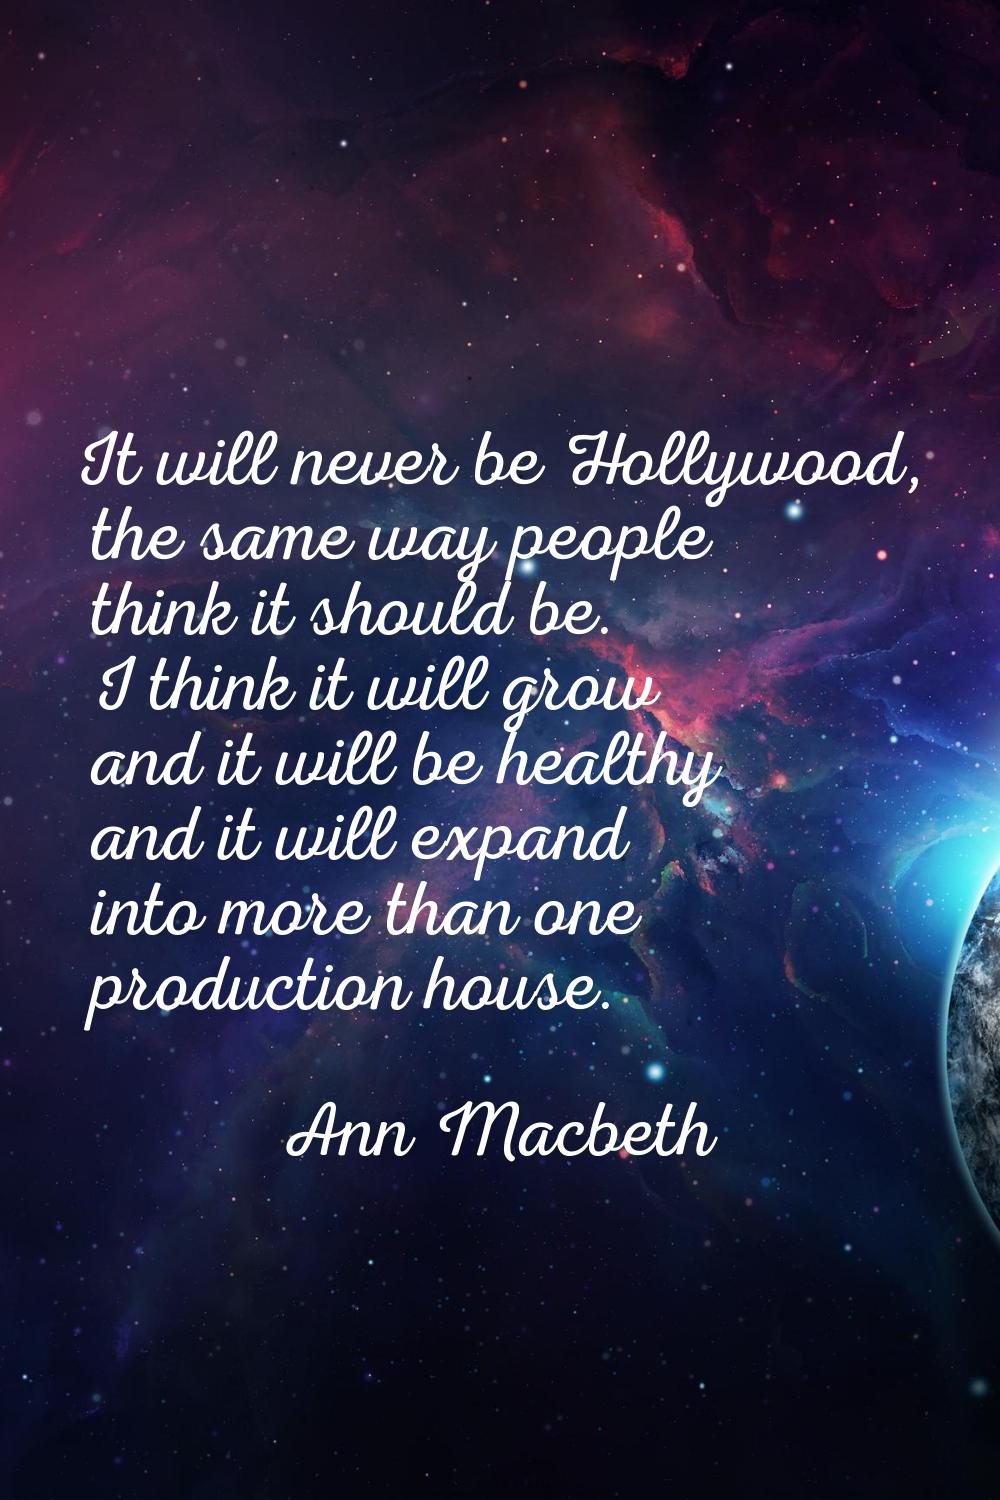 It will never be Hollywood, the same way people think it should be. I think it will grow and it wil